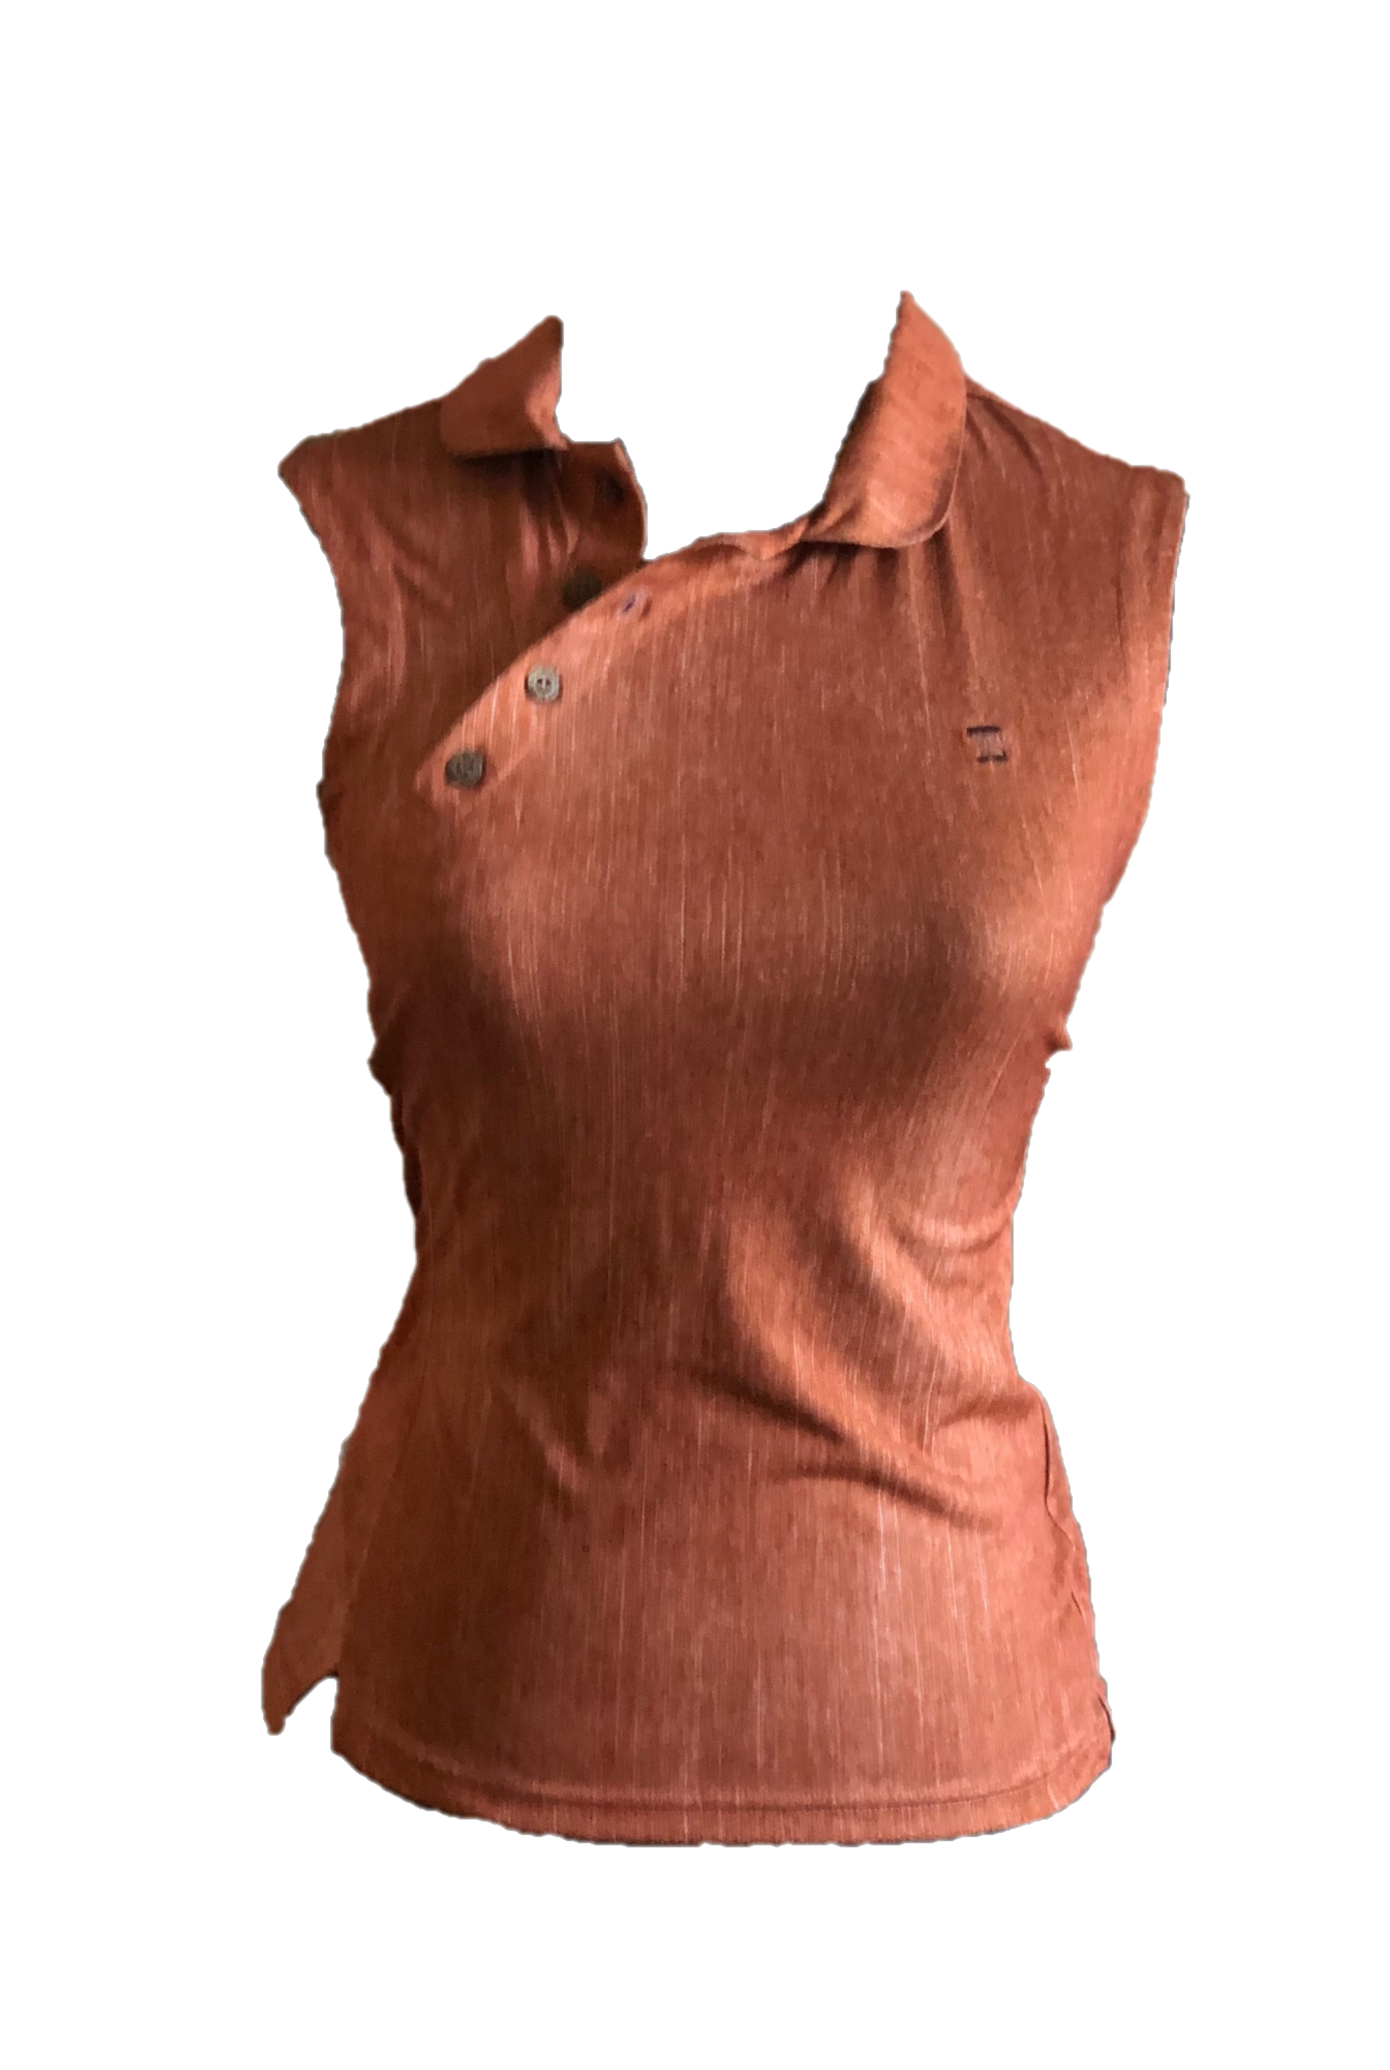 LT-091A || Ladies Sleeveless Top Burnt Orange with Fine Off White Fleck, Angled 4 Button Neck